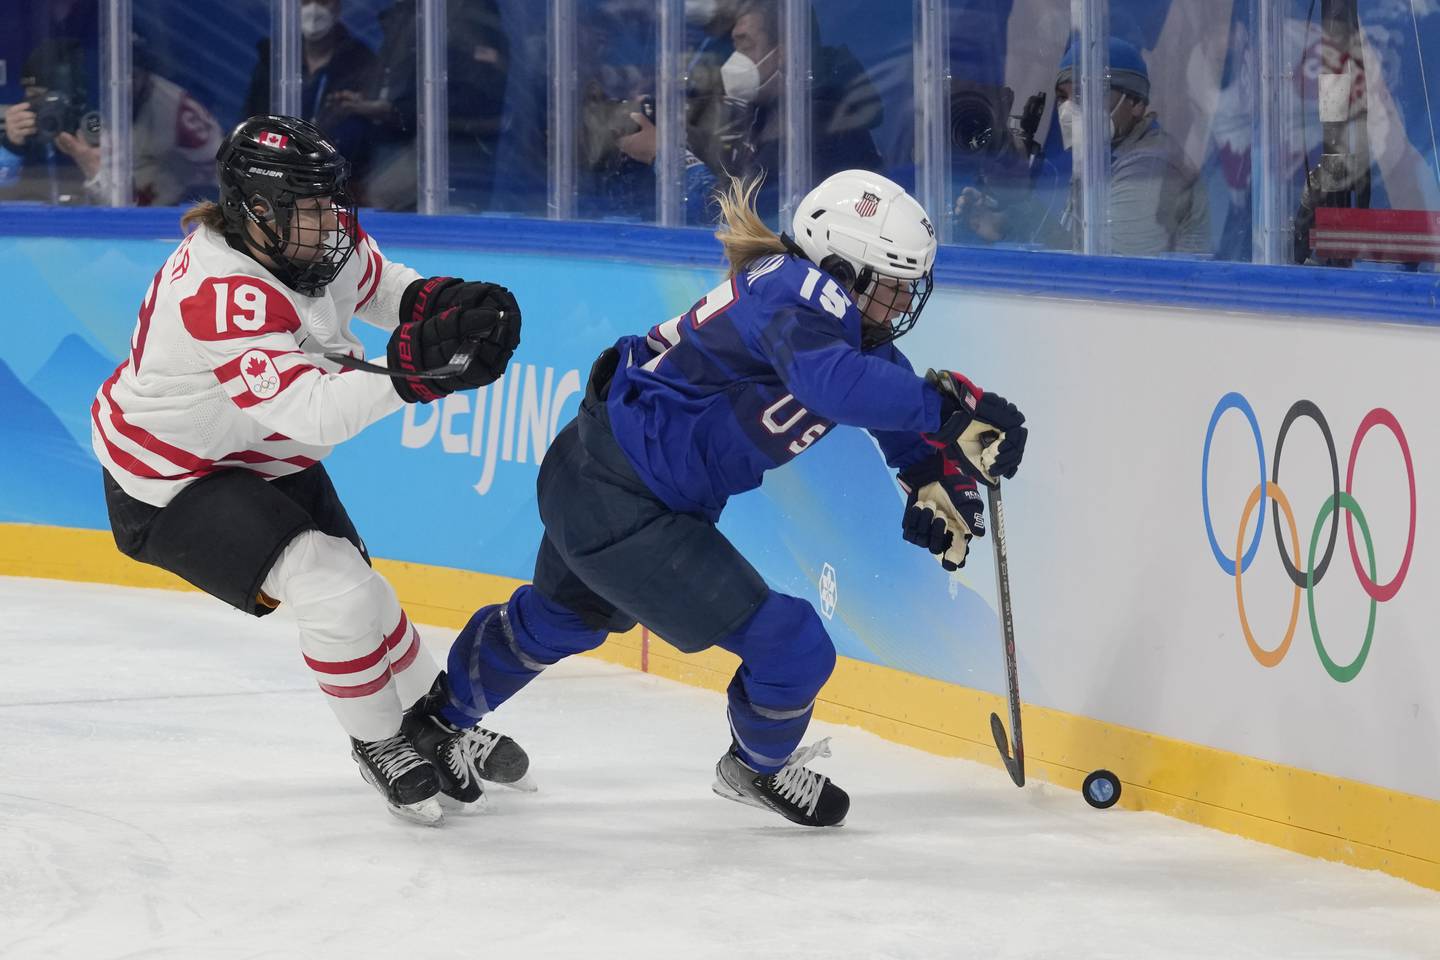 Canada's Brianne Jenner (19) chases United States' Savannah Harmon (15) during a preliminary round women's hockey game at the 2022 Winter Olympics, Tuesday, Feb. 8, 2022, in Beijing. (AP Photo/Petr David Josek)